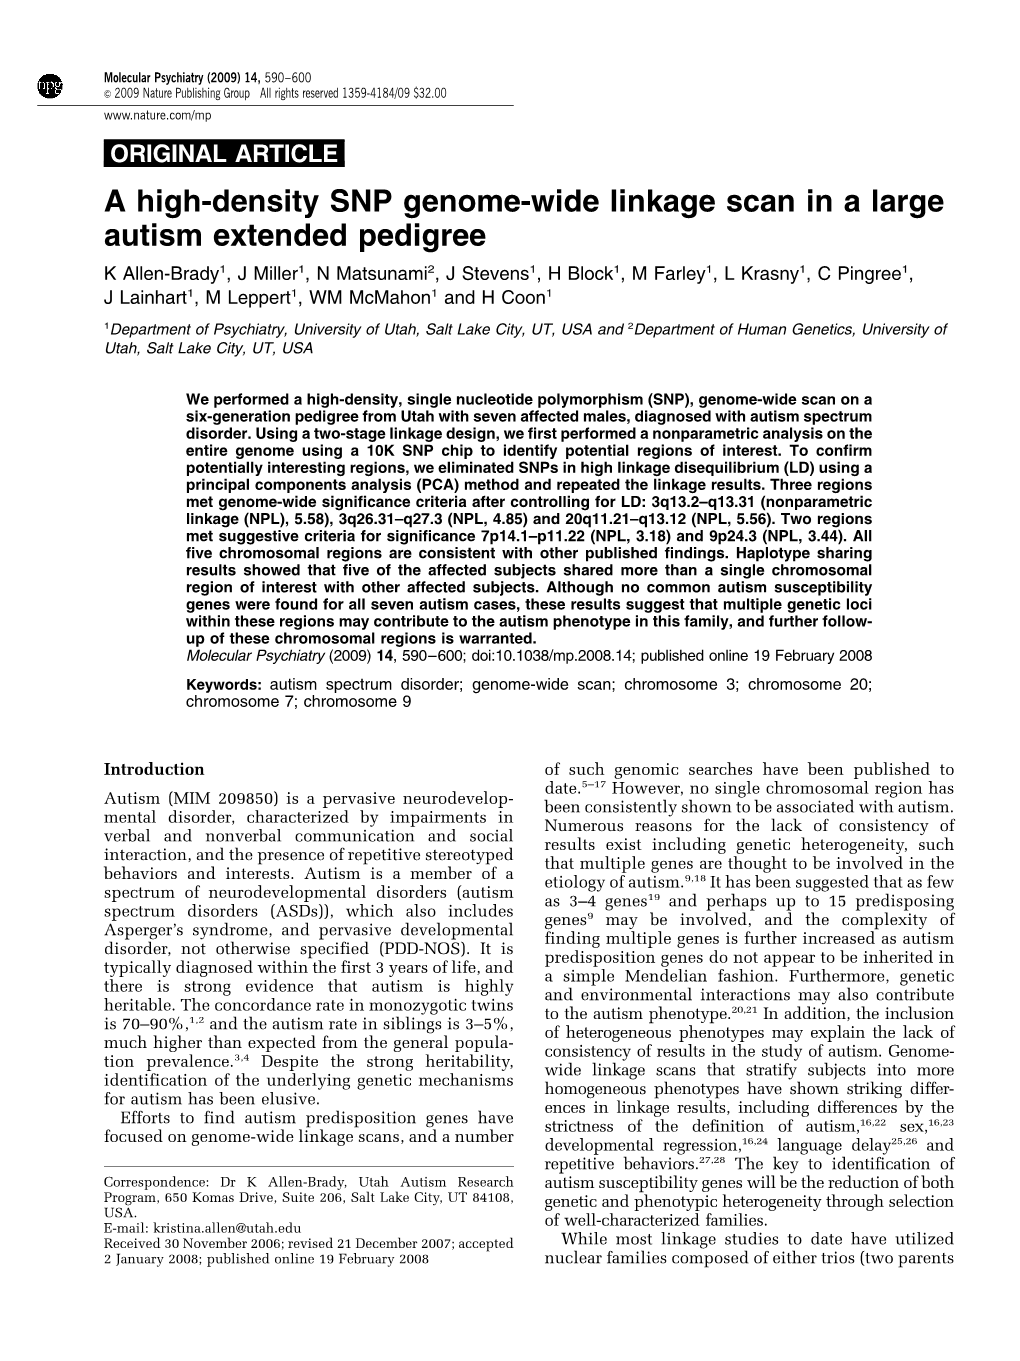 A High-Density SNP Genome-Wide Linkage Scan in a Large Autism